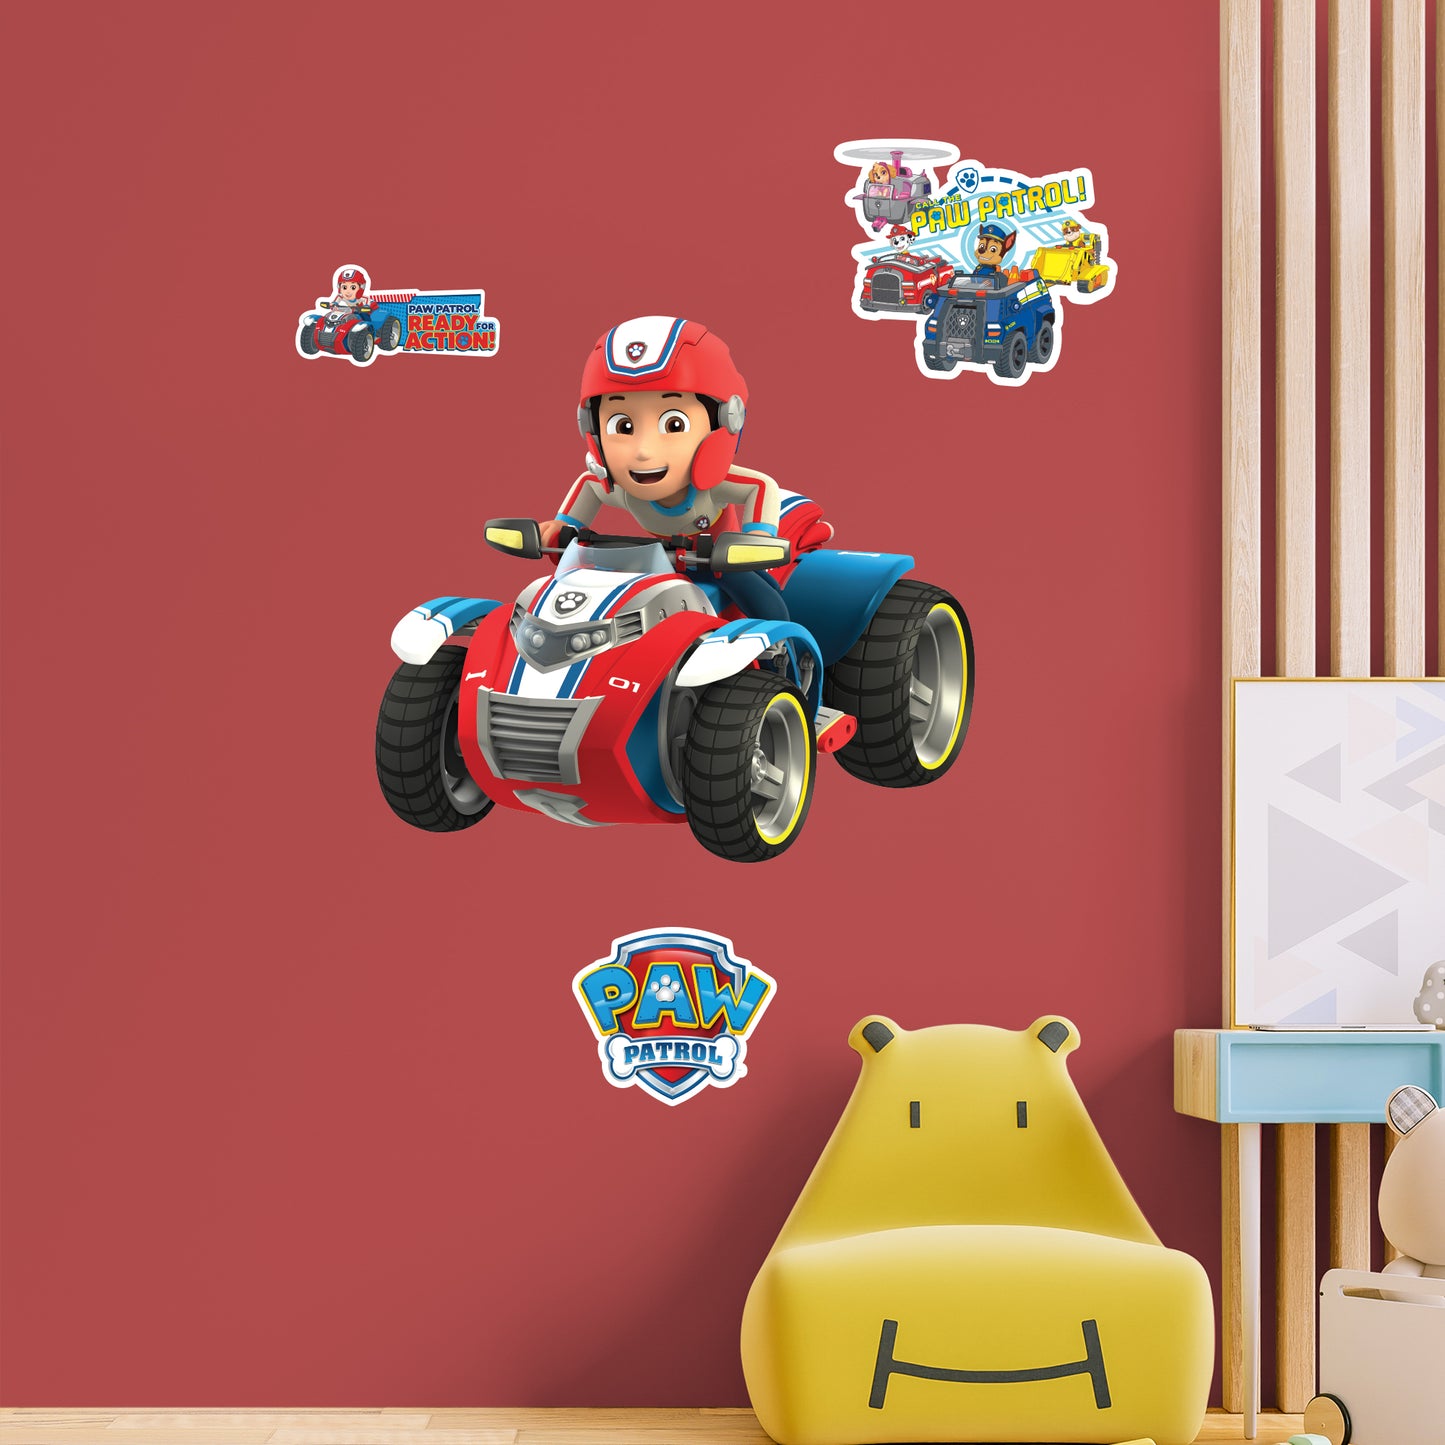 Giant Character +3 Decals  (26"W x 29"H)